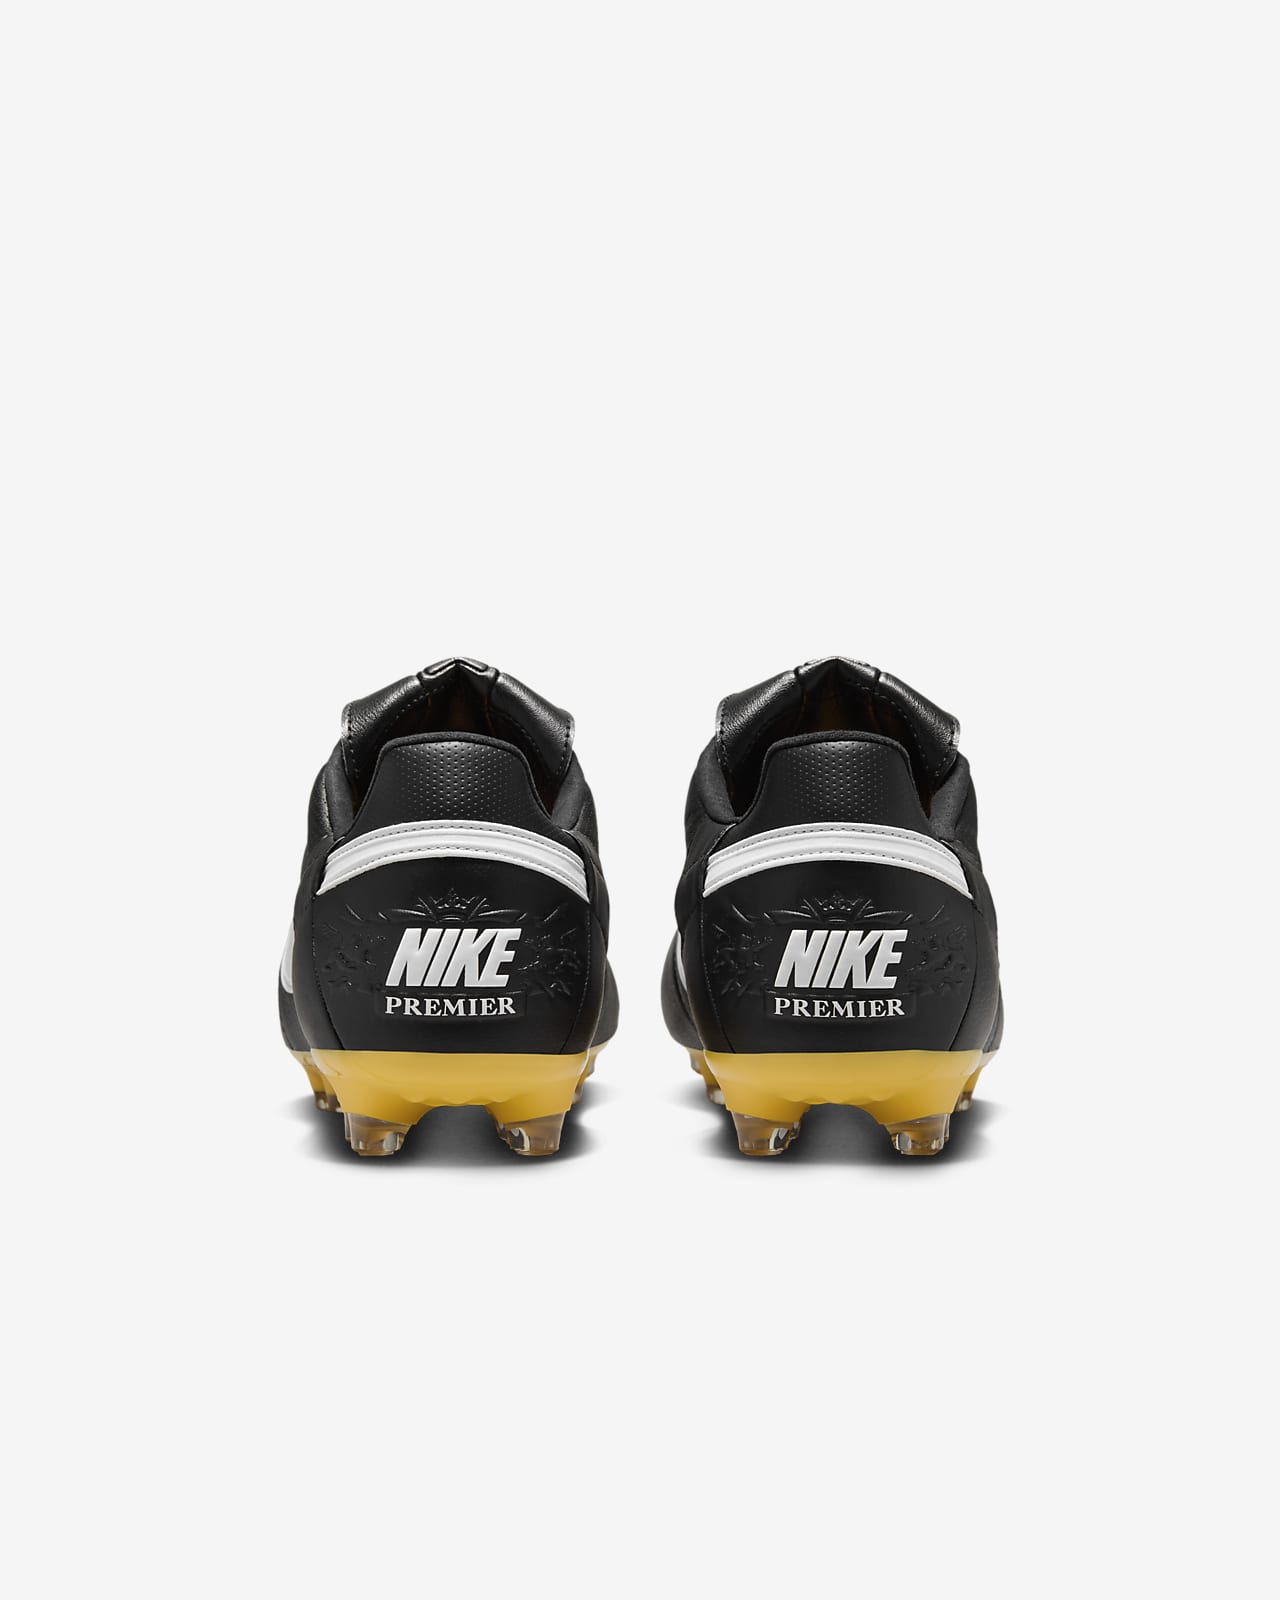 3 Inches Blood - Nike Premier 3 FG Football Boots - Nike 6.0 Zoom Oncore  High - IetpShops